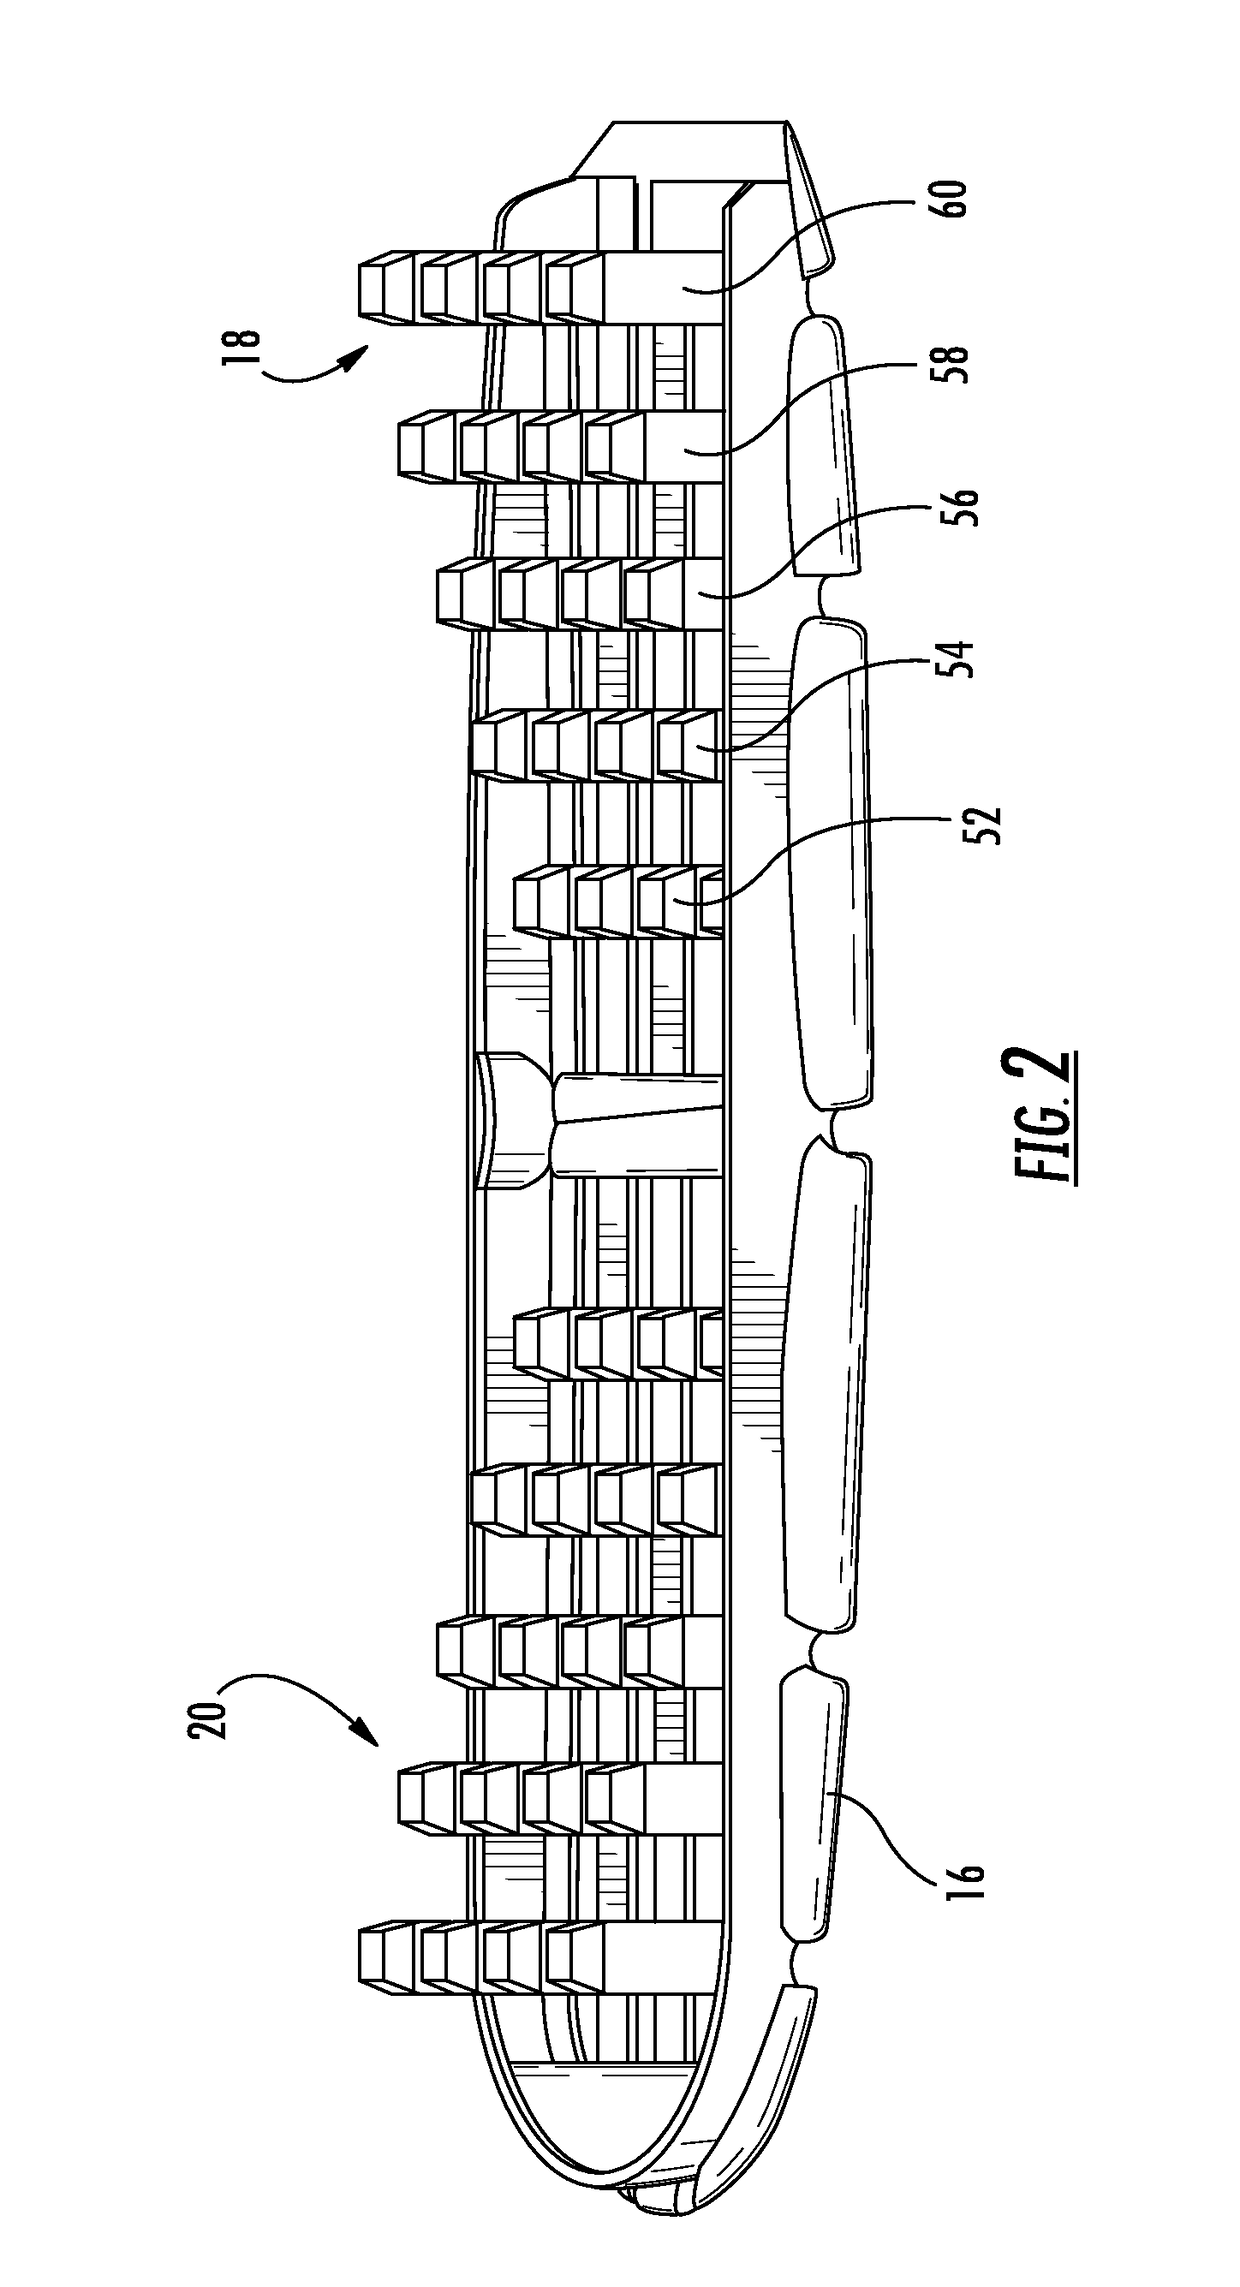 Expandable and adjustable lordosis interbody fusion system